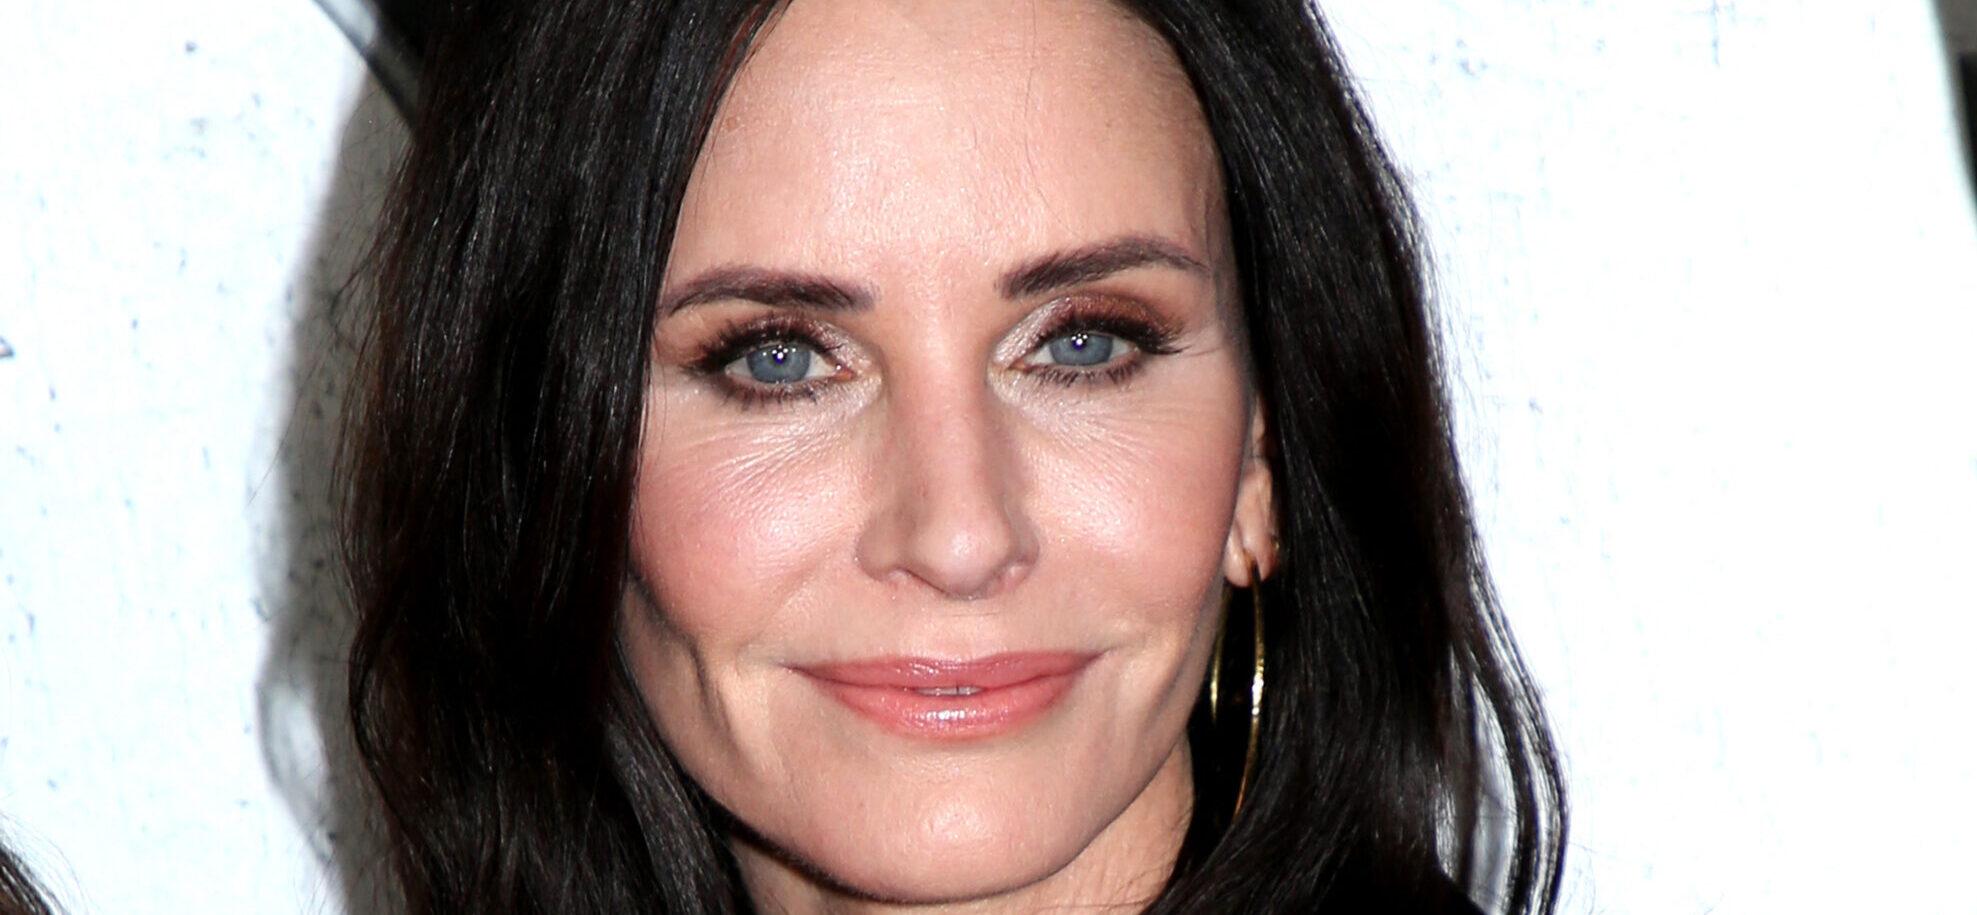 Original ‘Scream’ Actress Courteney Cox Could Join Neve Campbell In ‘Scream 7’